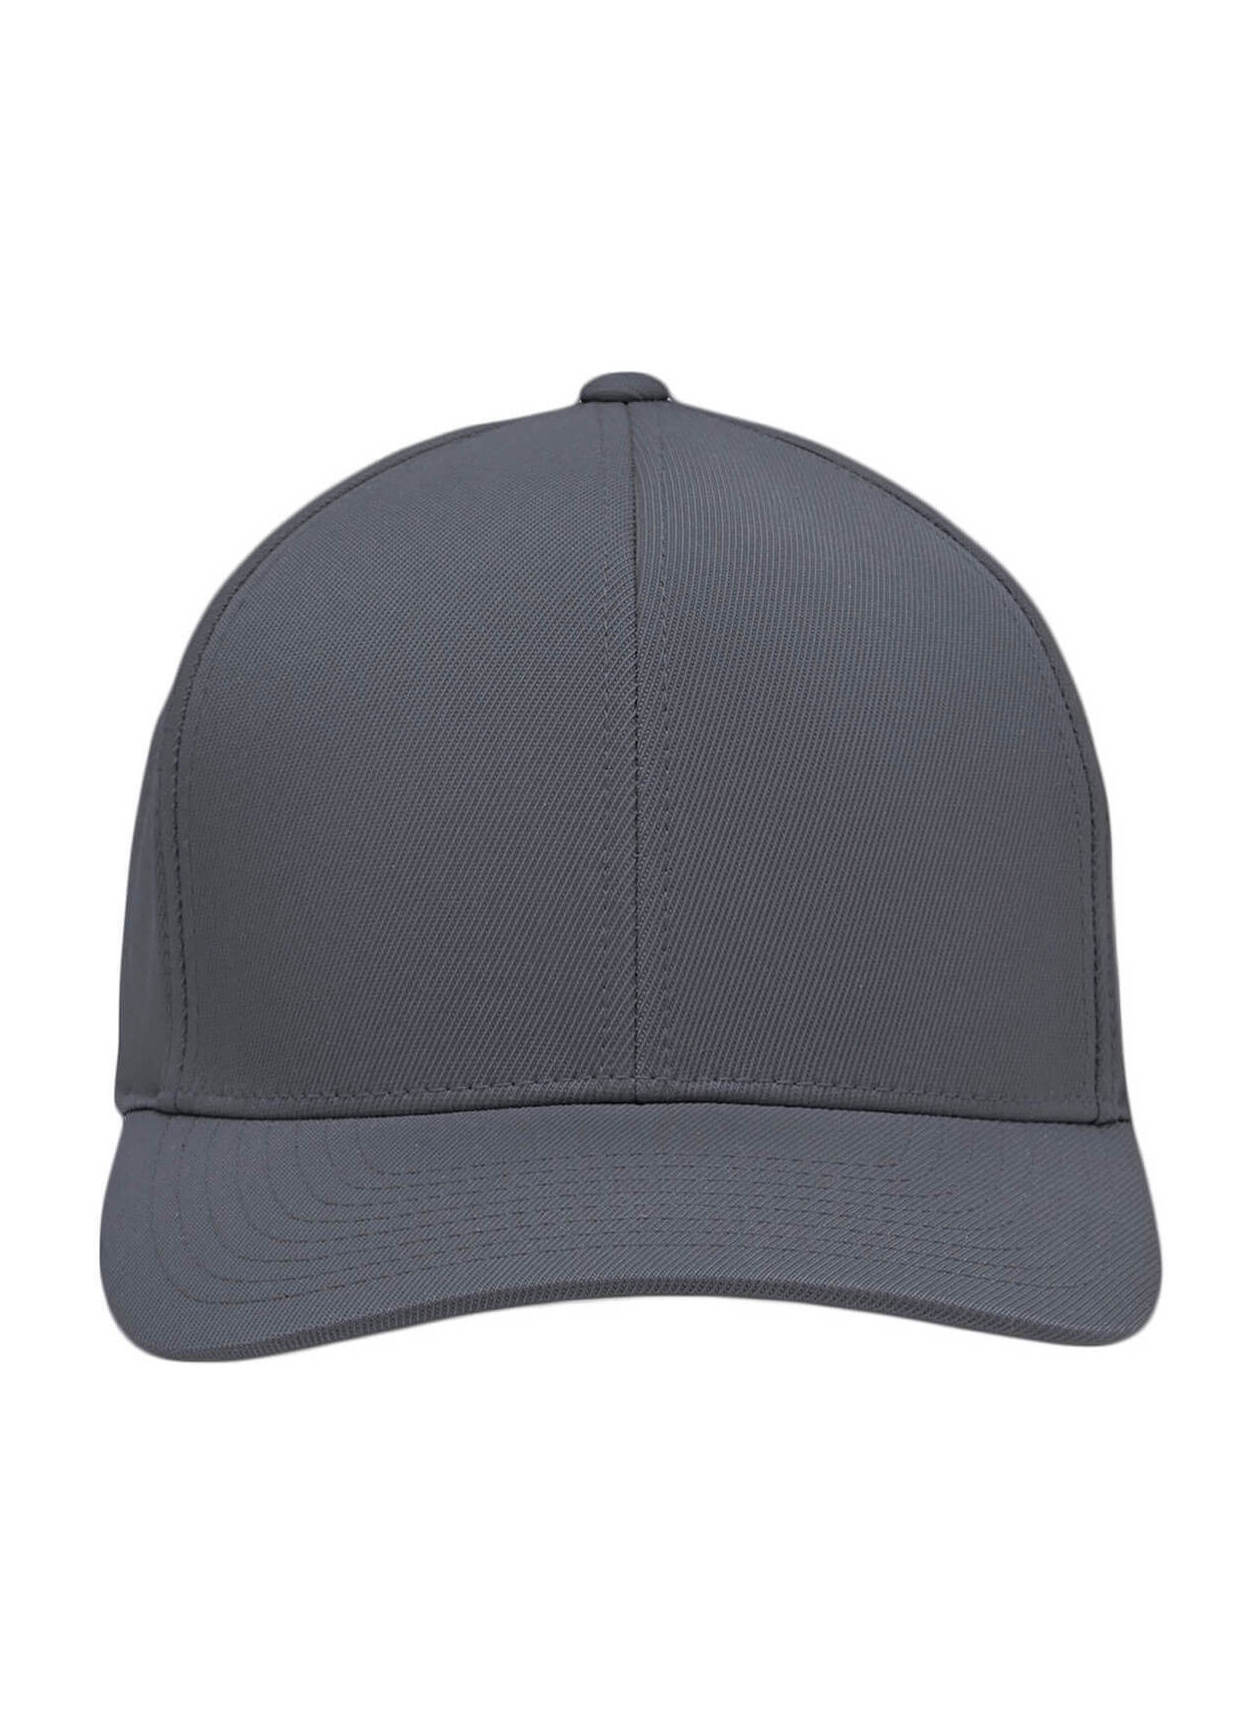 G/FORE Blank Front Snapback Hat Heather Grey